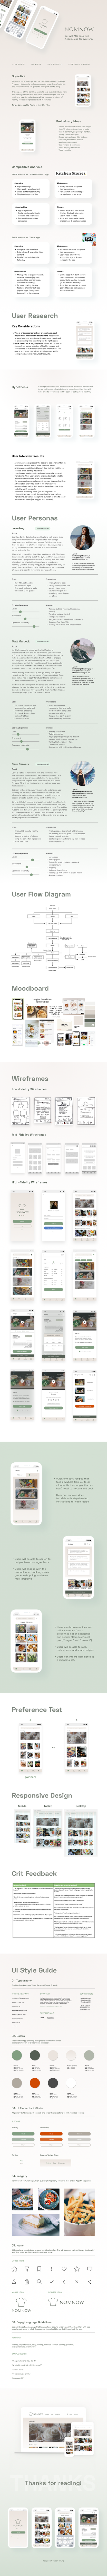 UI/UX Interaction design  CareerFoundry ios visual design recipe app iconography cooking